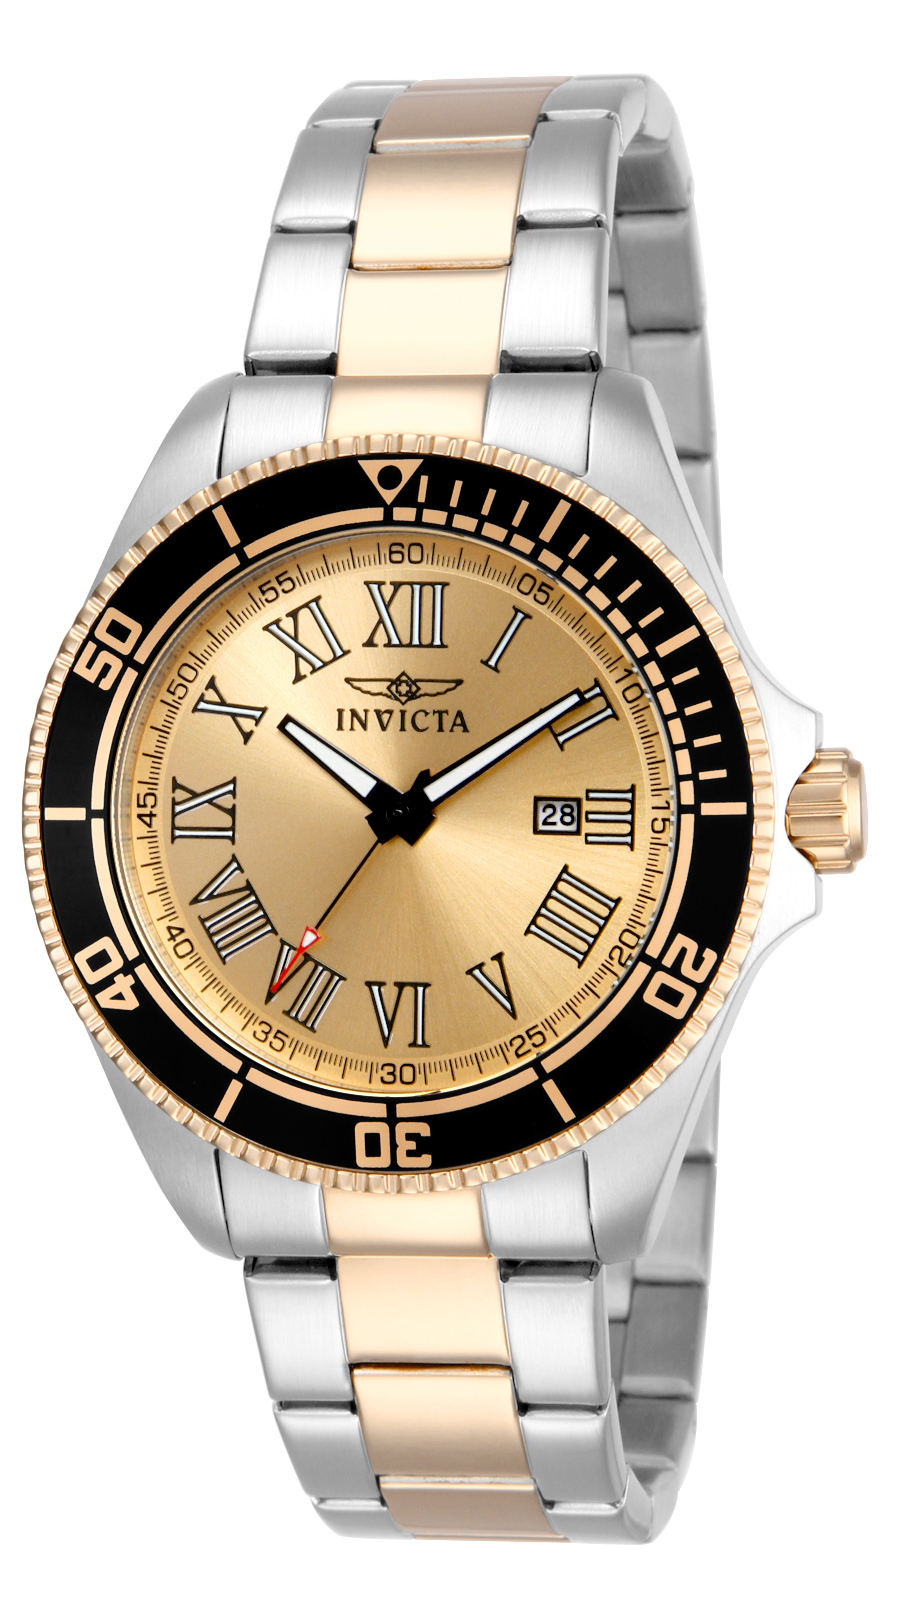 Rolex Oyster Perpetual Date for Rs.428,665 for sale from a Private Seller  on Chrono24